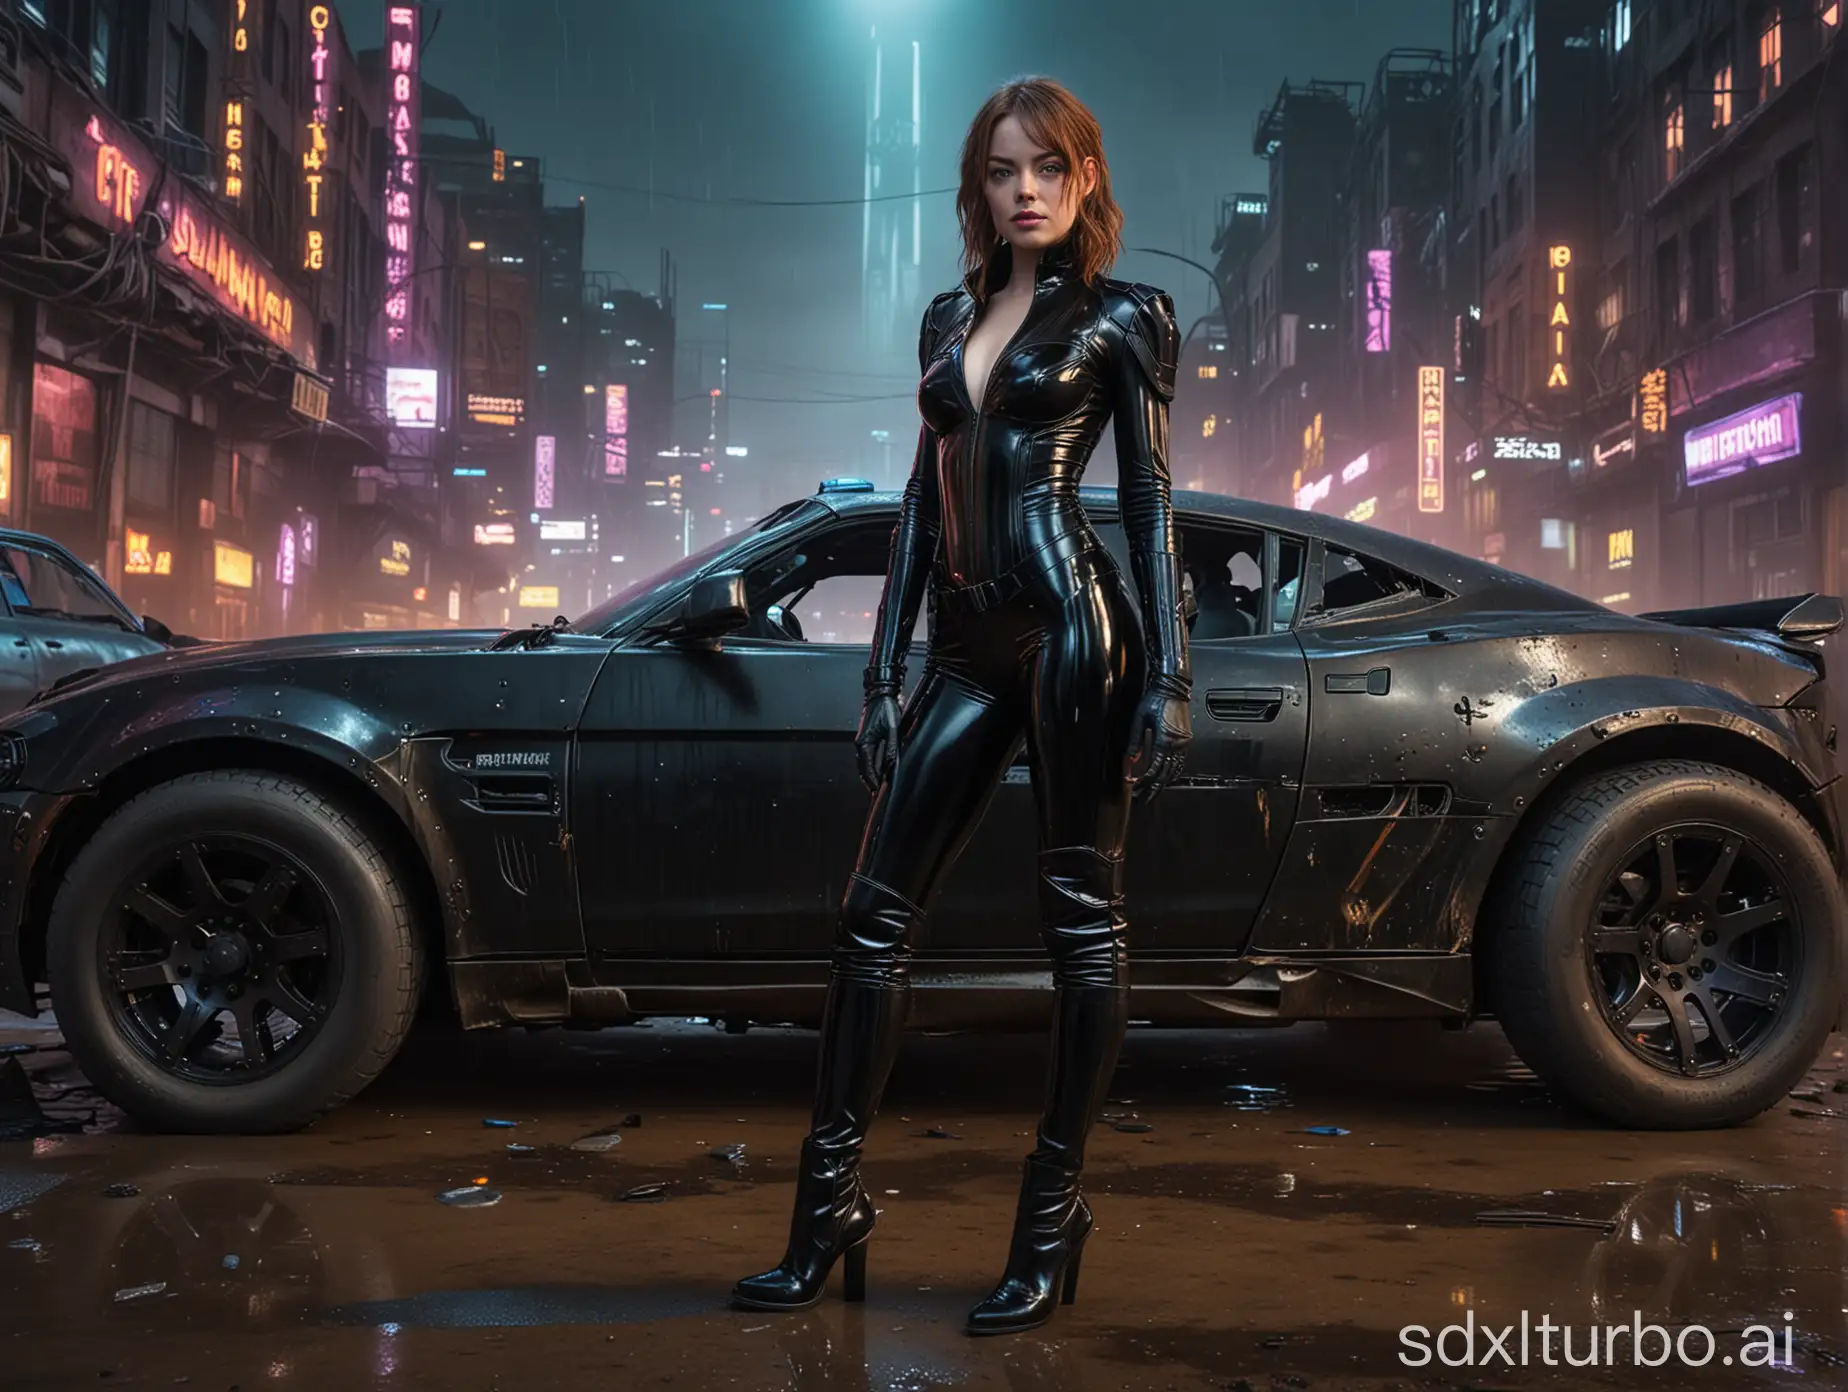 realistic HD photo, cyberpunk police Emma Stone standing, wearing black low-cut shiny PVC catsuit, wearing long shiny PVC gloves, wearing shiny PVC thigh high boots, in destroyed cyberpunk city with Mad Max car, illuminated by neon lights